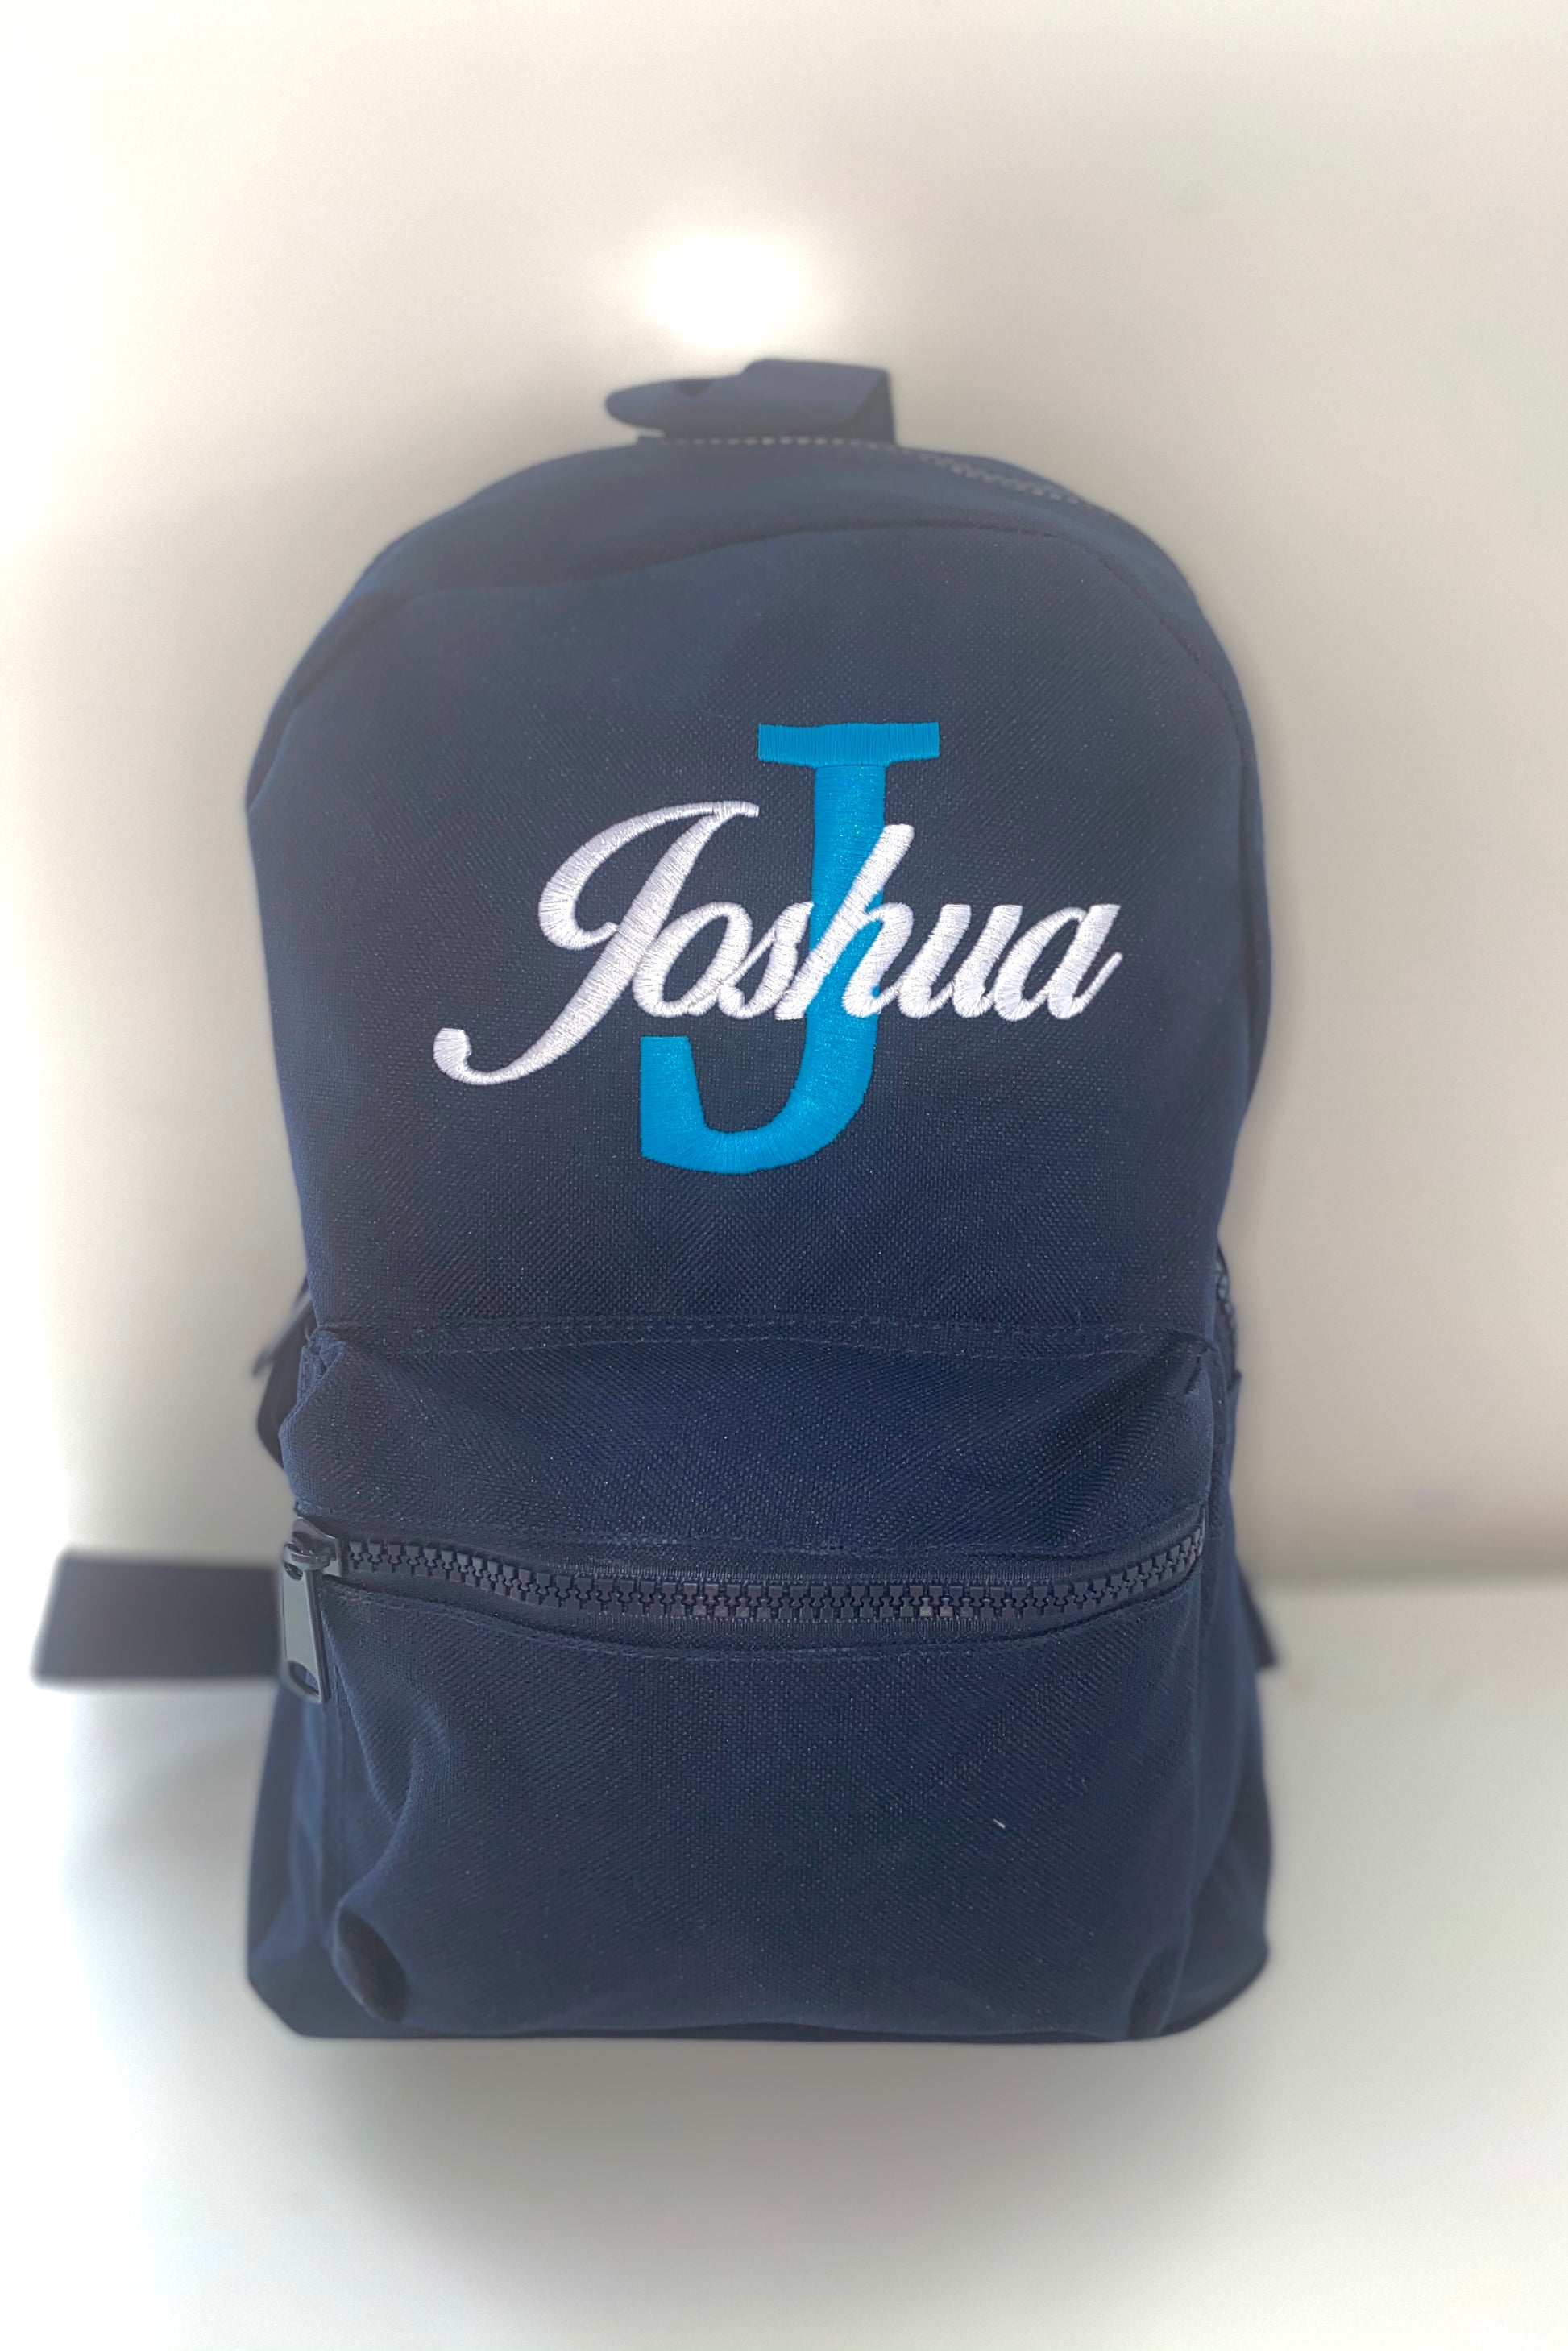 Embroidered Navy Backpack - Bright Blue Initial - White Birds of Paradise Font